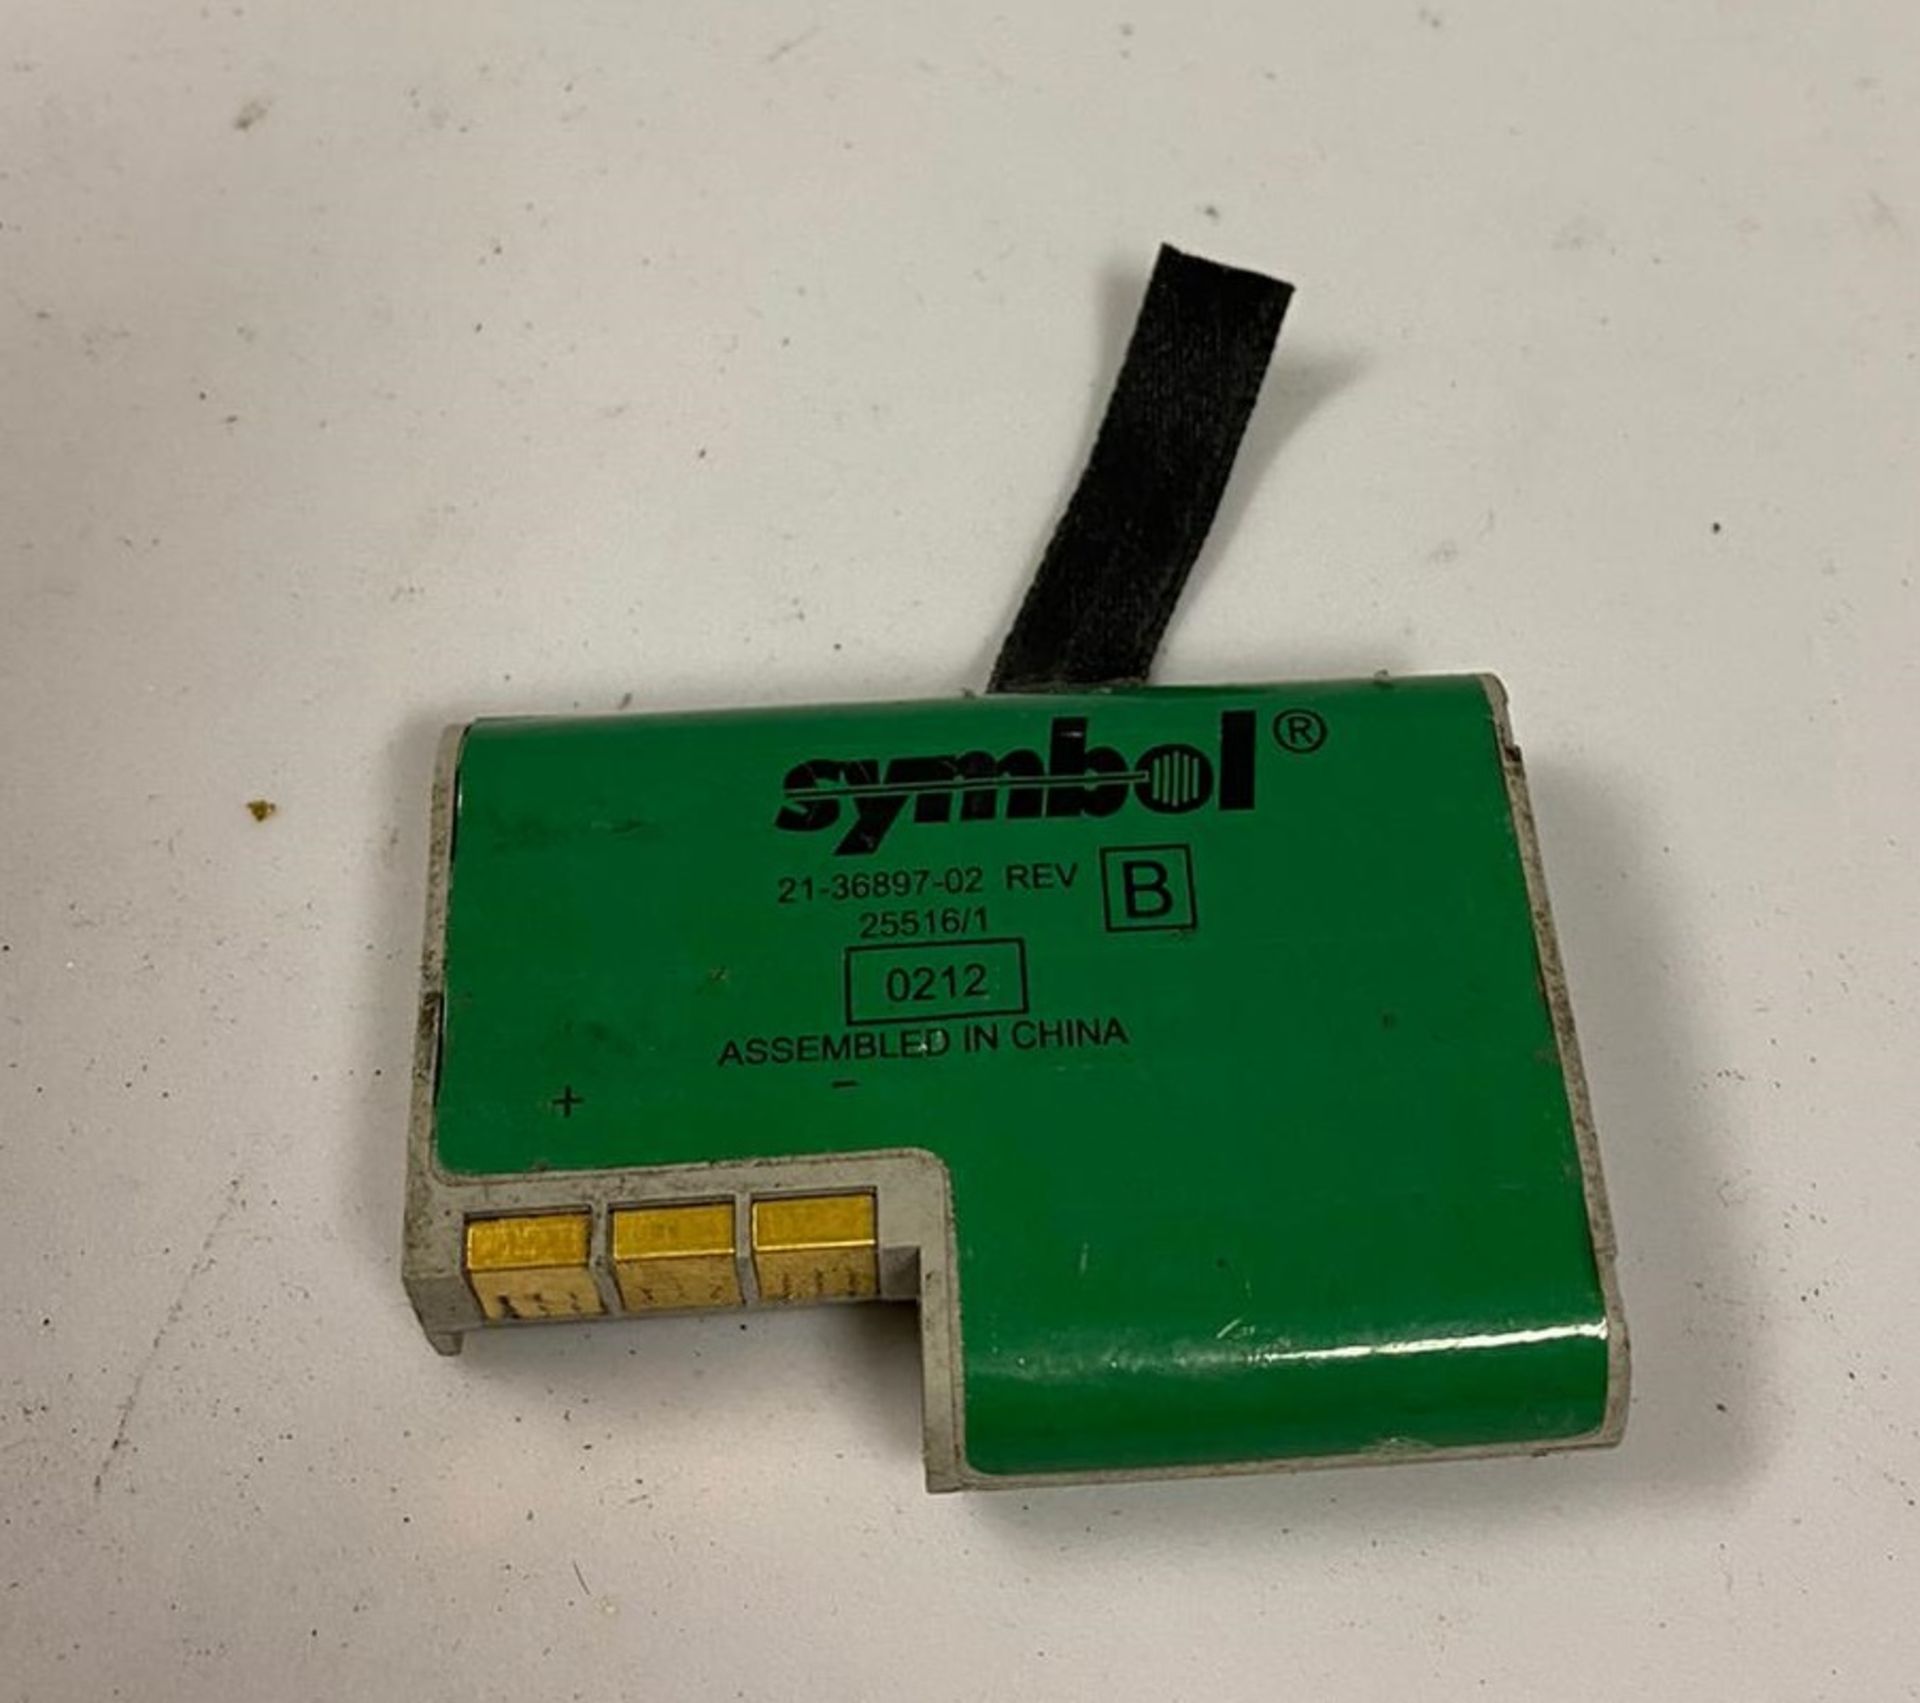 5 x Symbol 21-36897-02 Rechargeable 6.0V Batteries - Used Condition - Location: Altrincham WA14 - Image 5 of 5